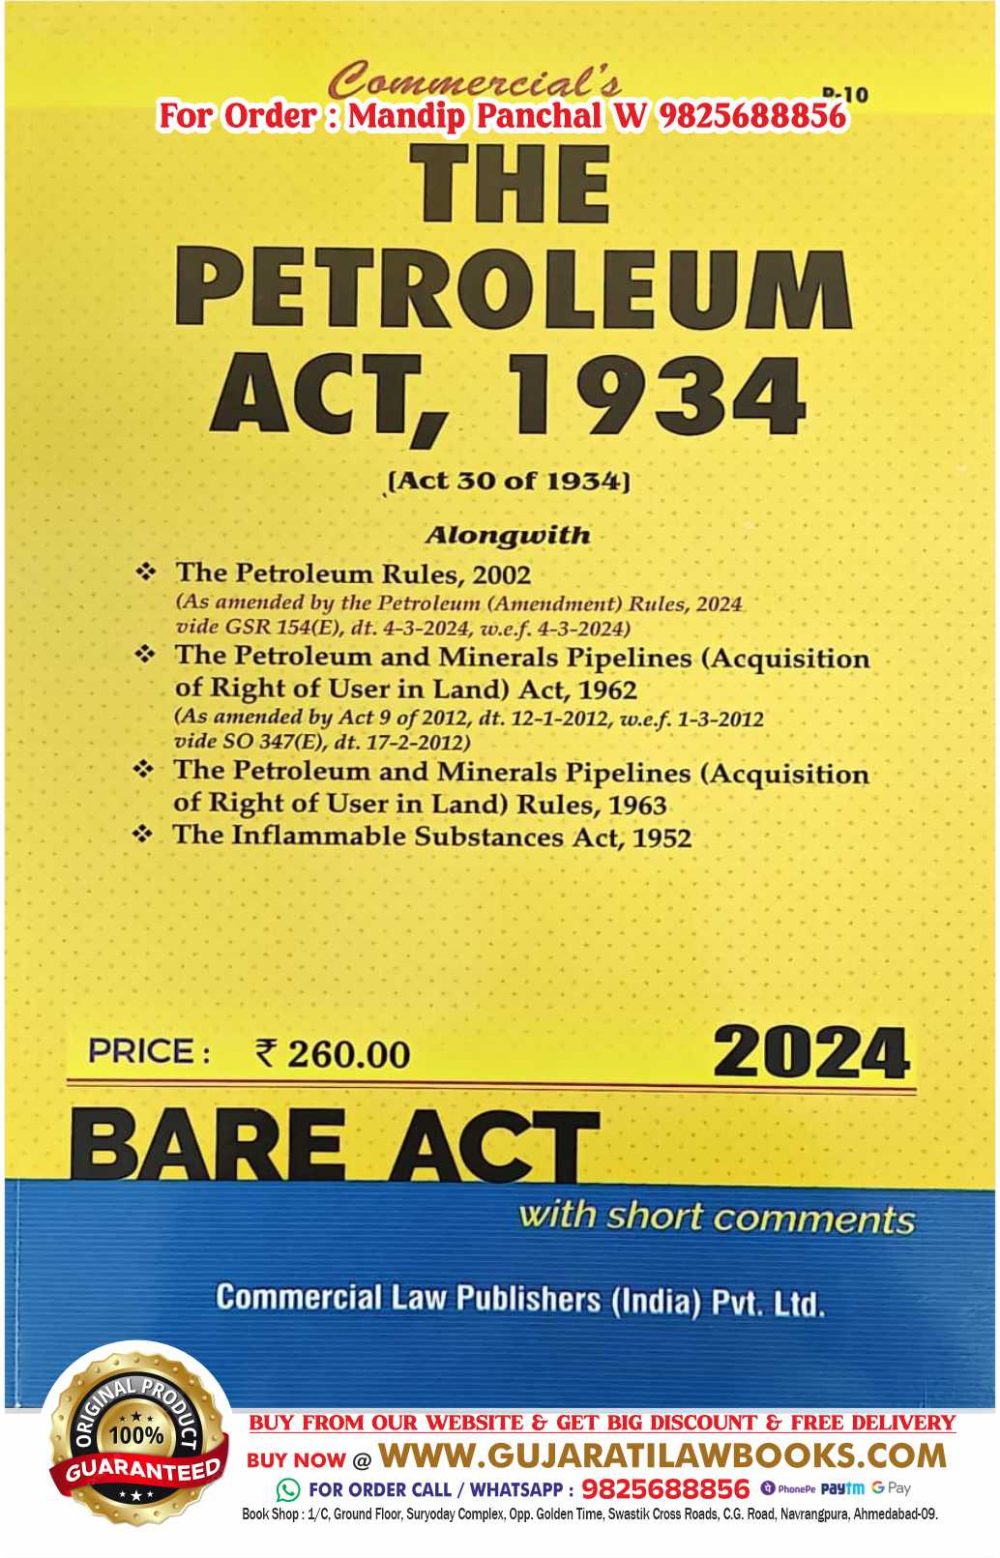 Petroleum Act, 1934 - BARE ACT - Latest 2024 Edition Commercial